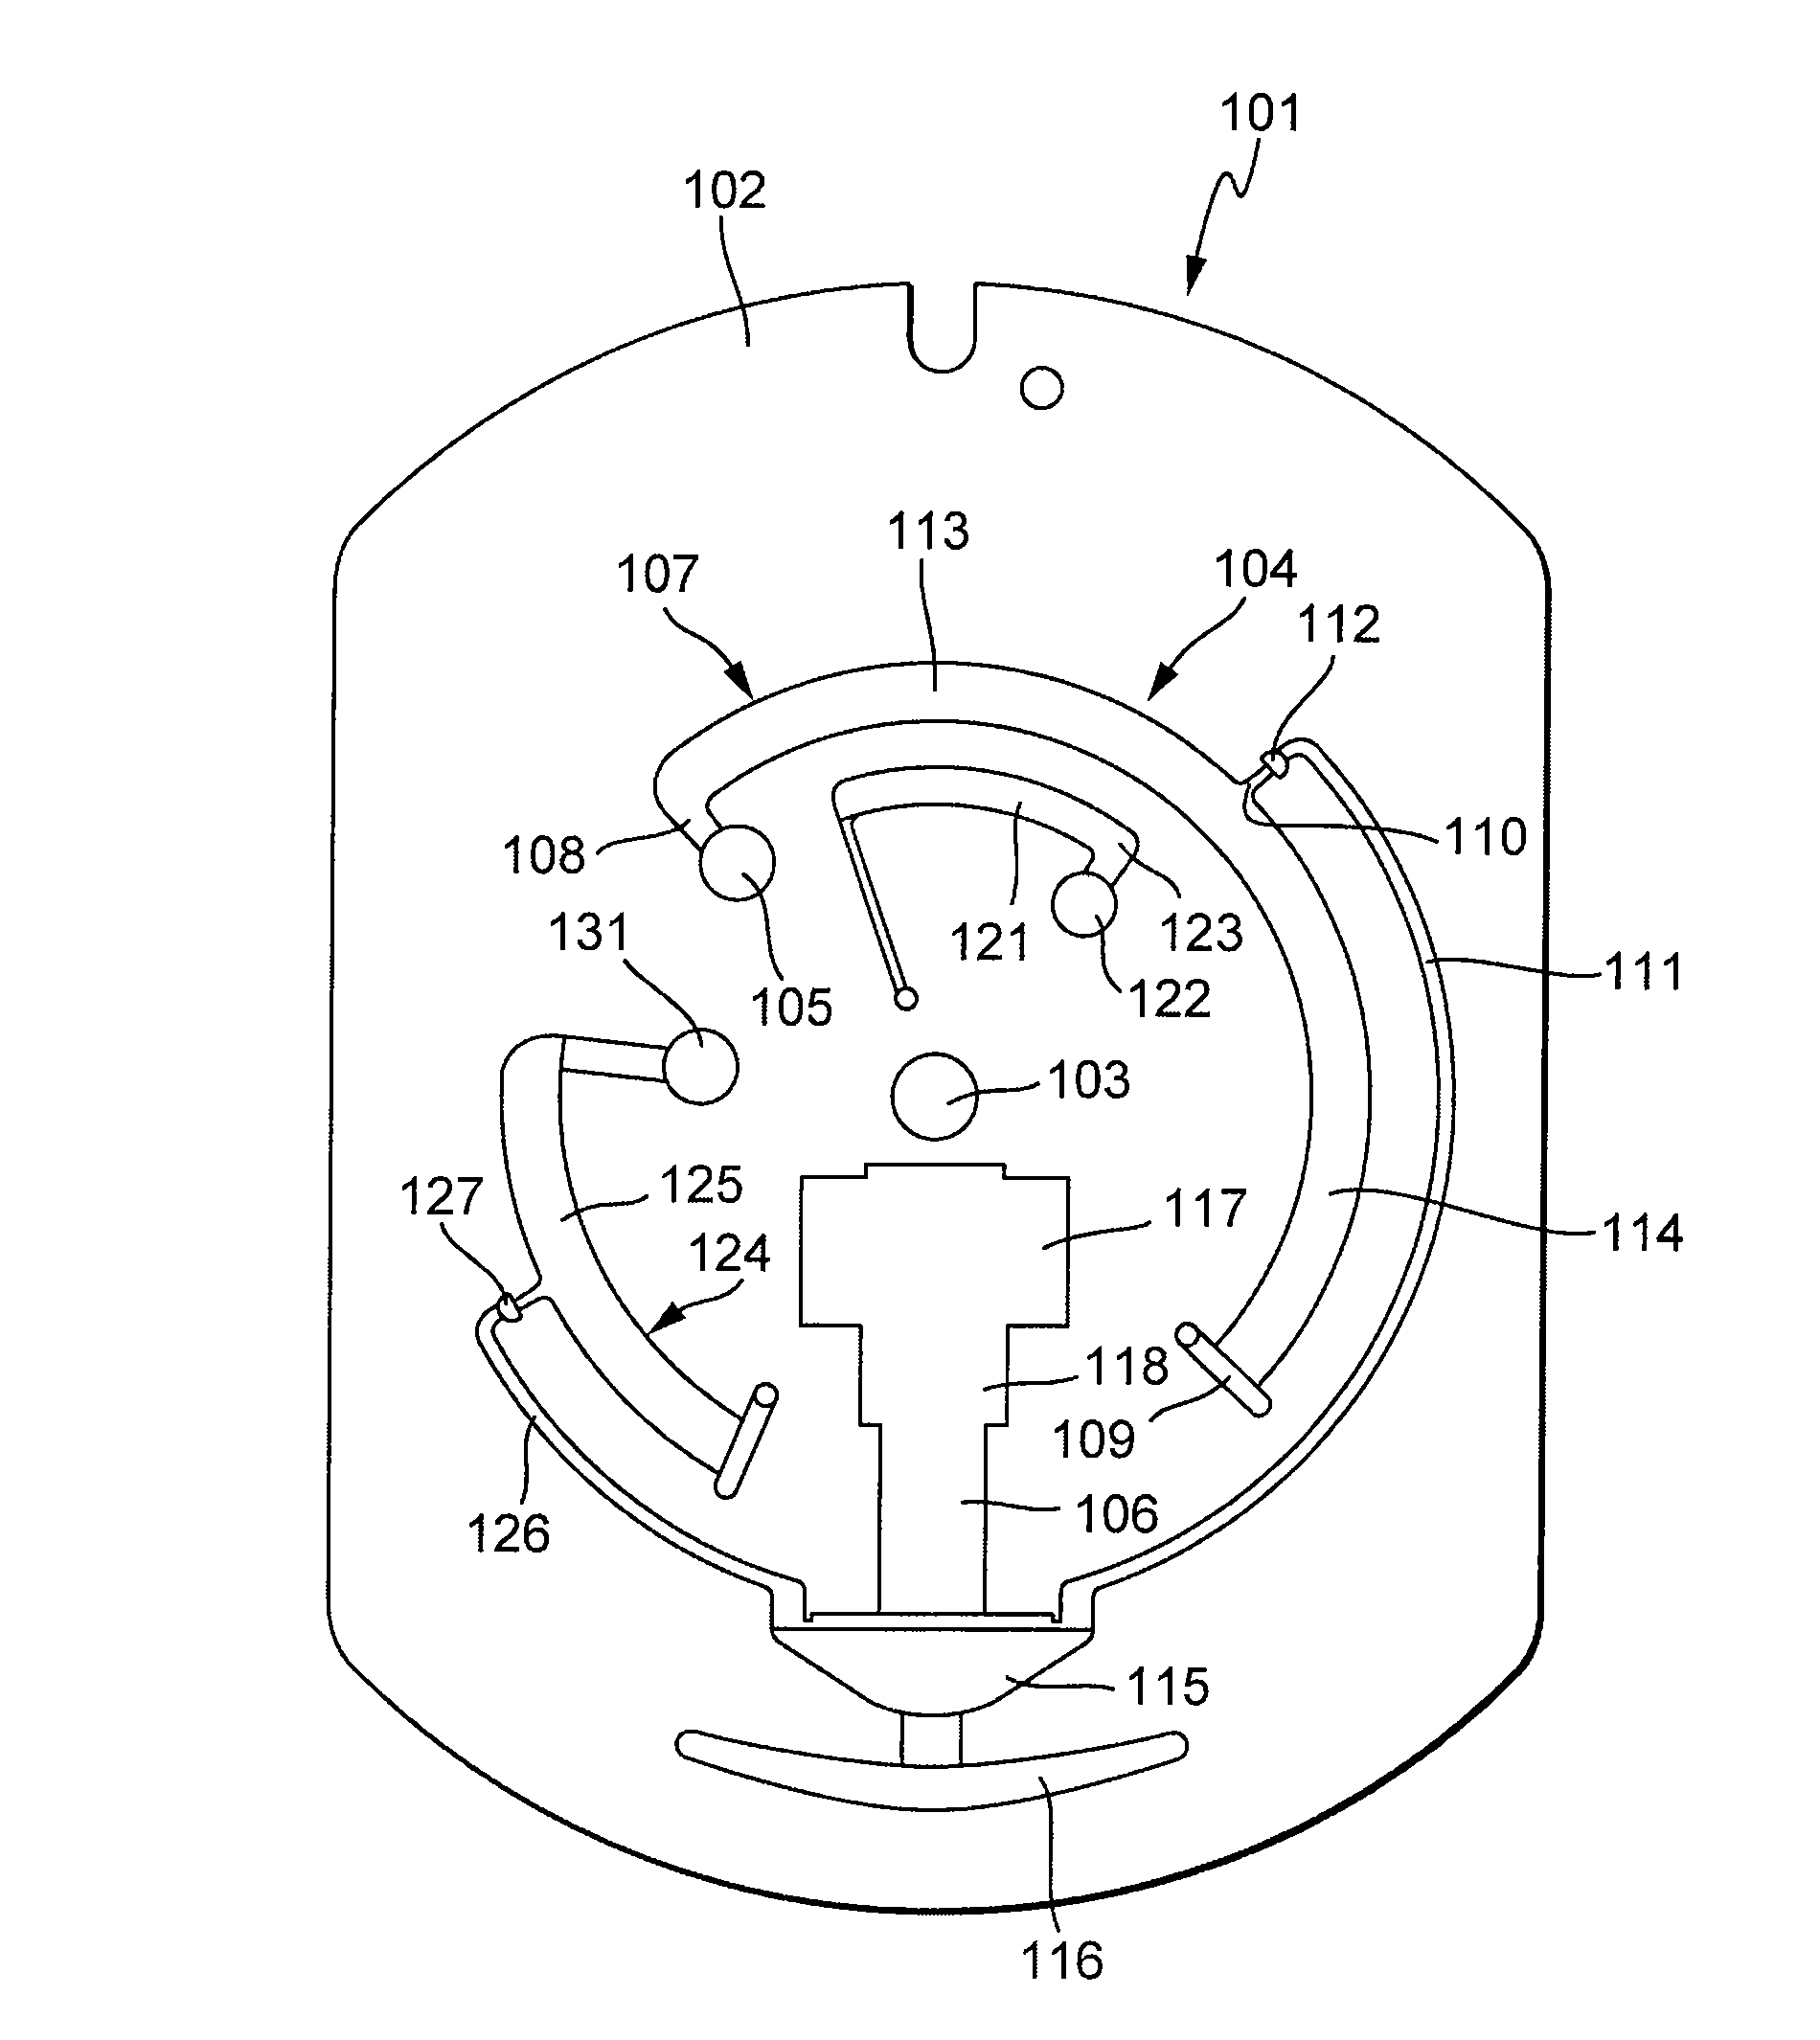 Microfluidic element for thoroughly mixing a liquid with a reagent